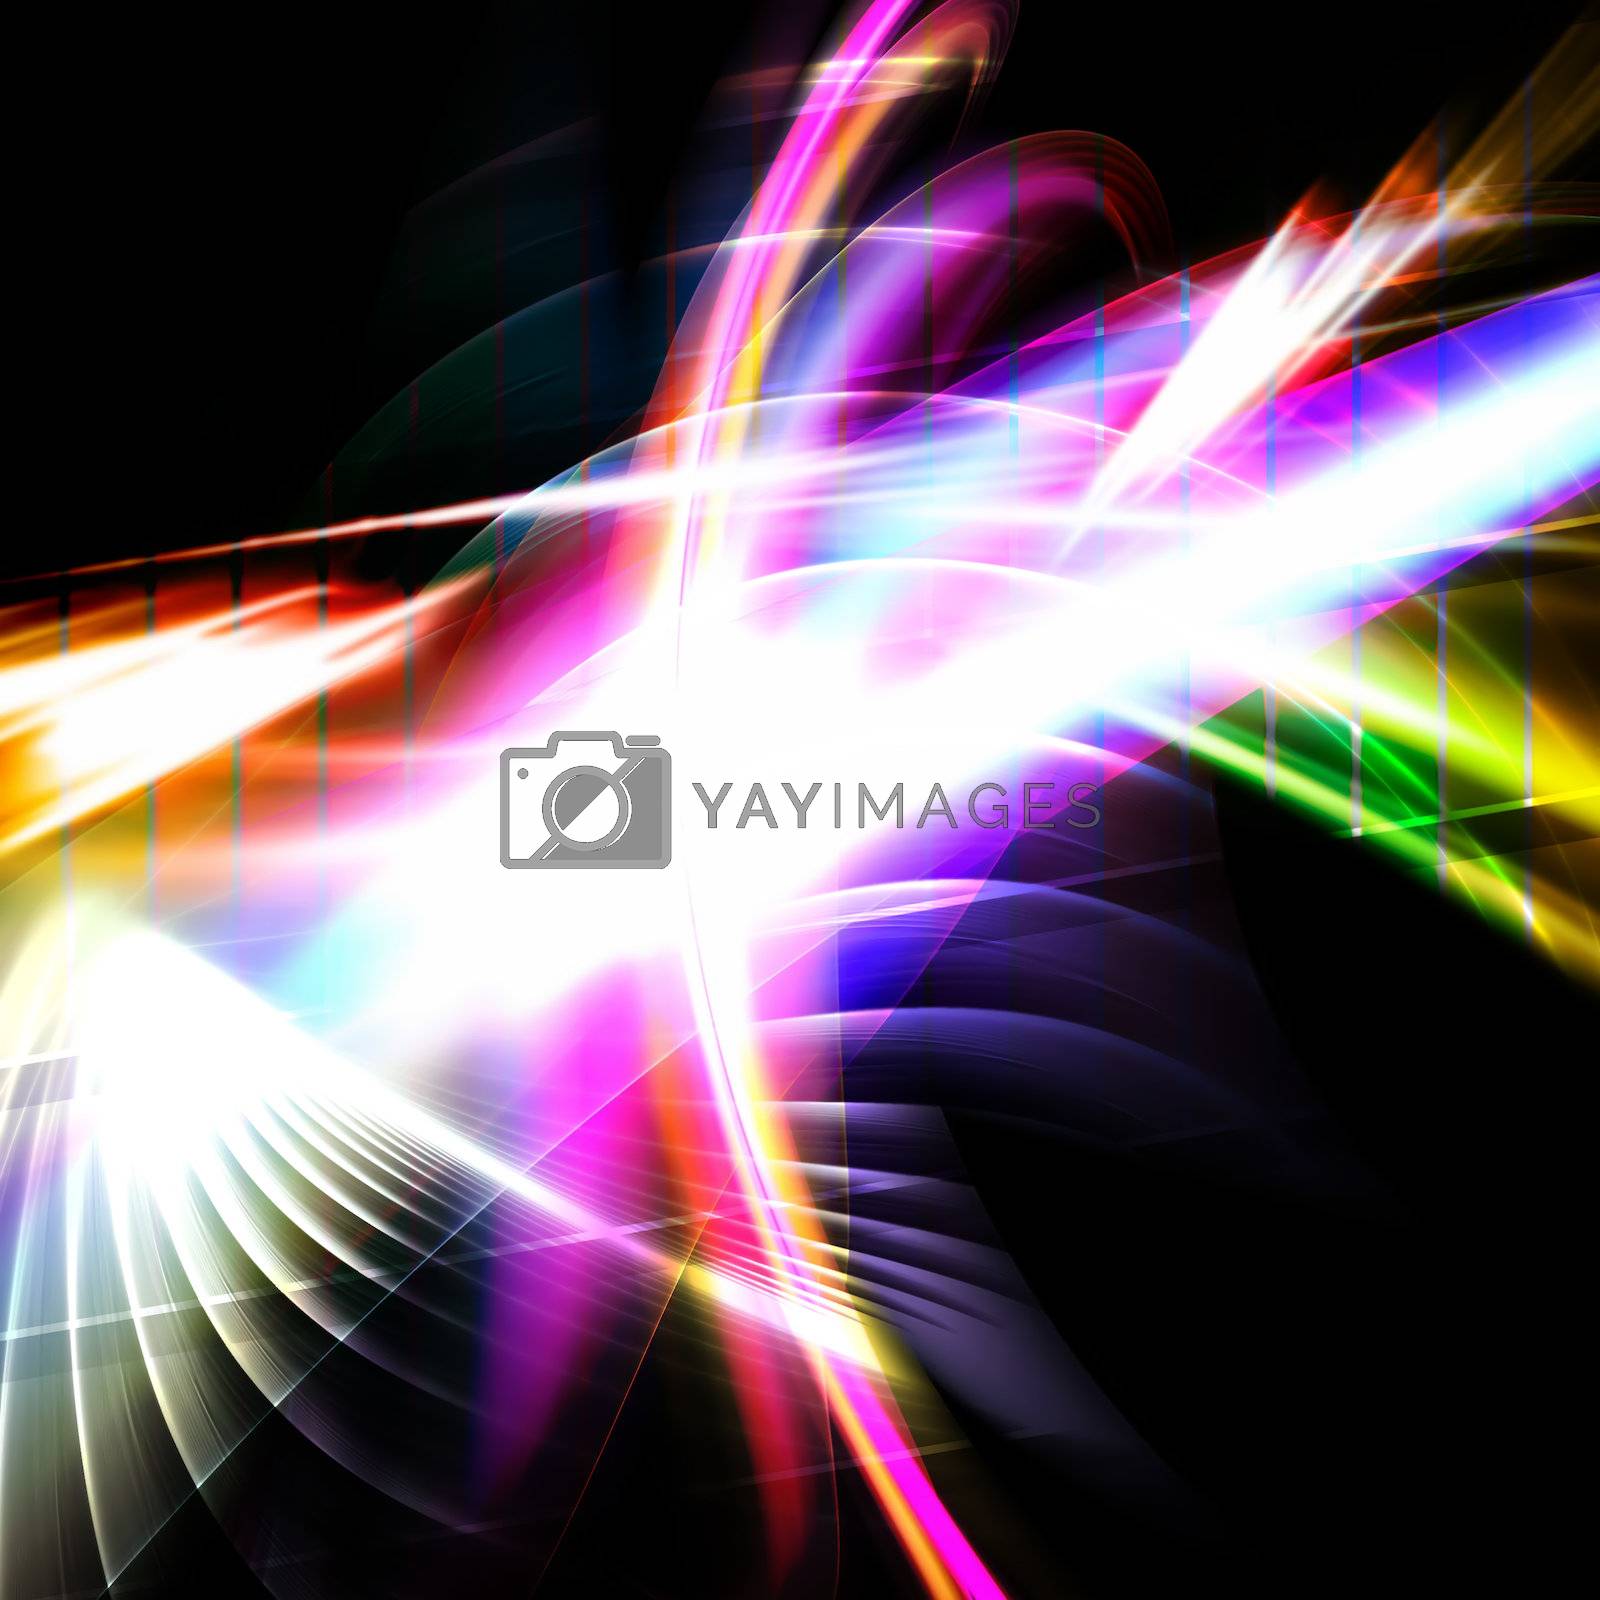 Royalty free image of Rainbow Fractal Abstract by graficallyminded